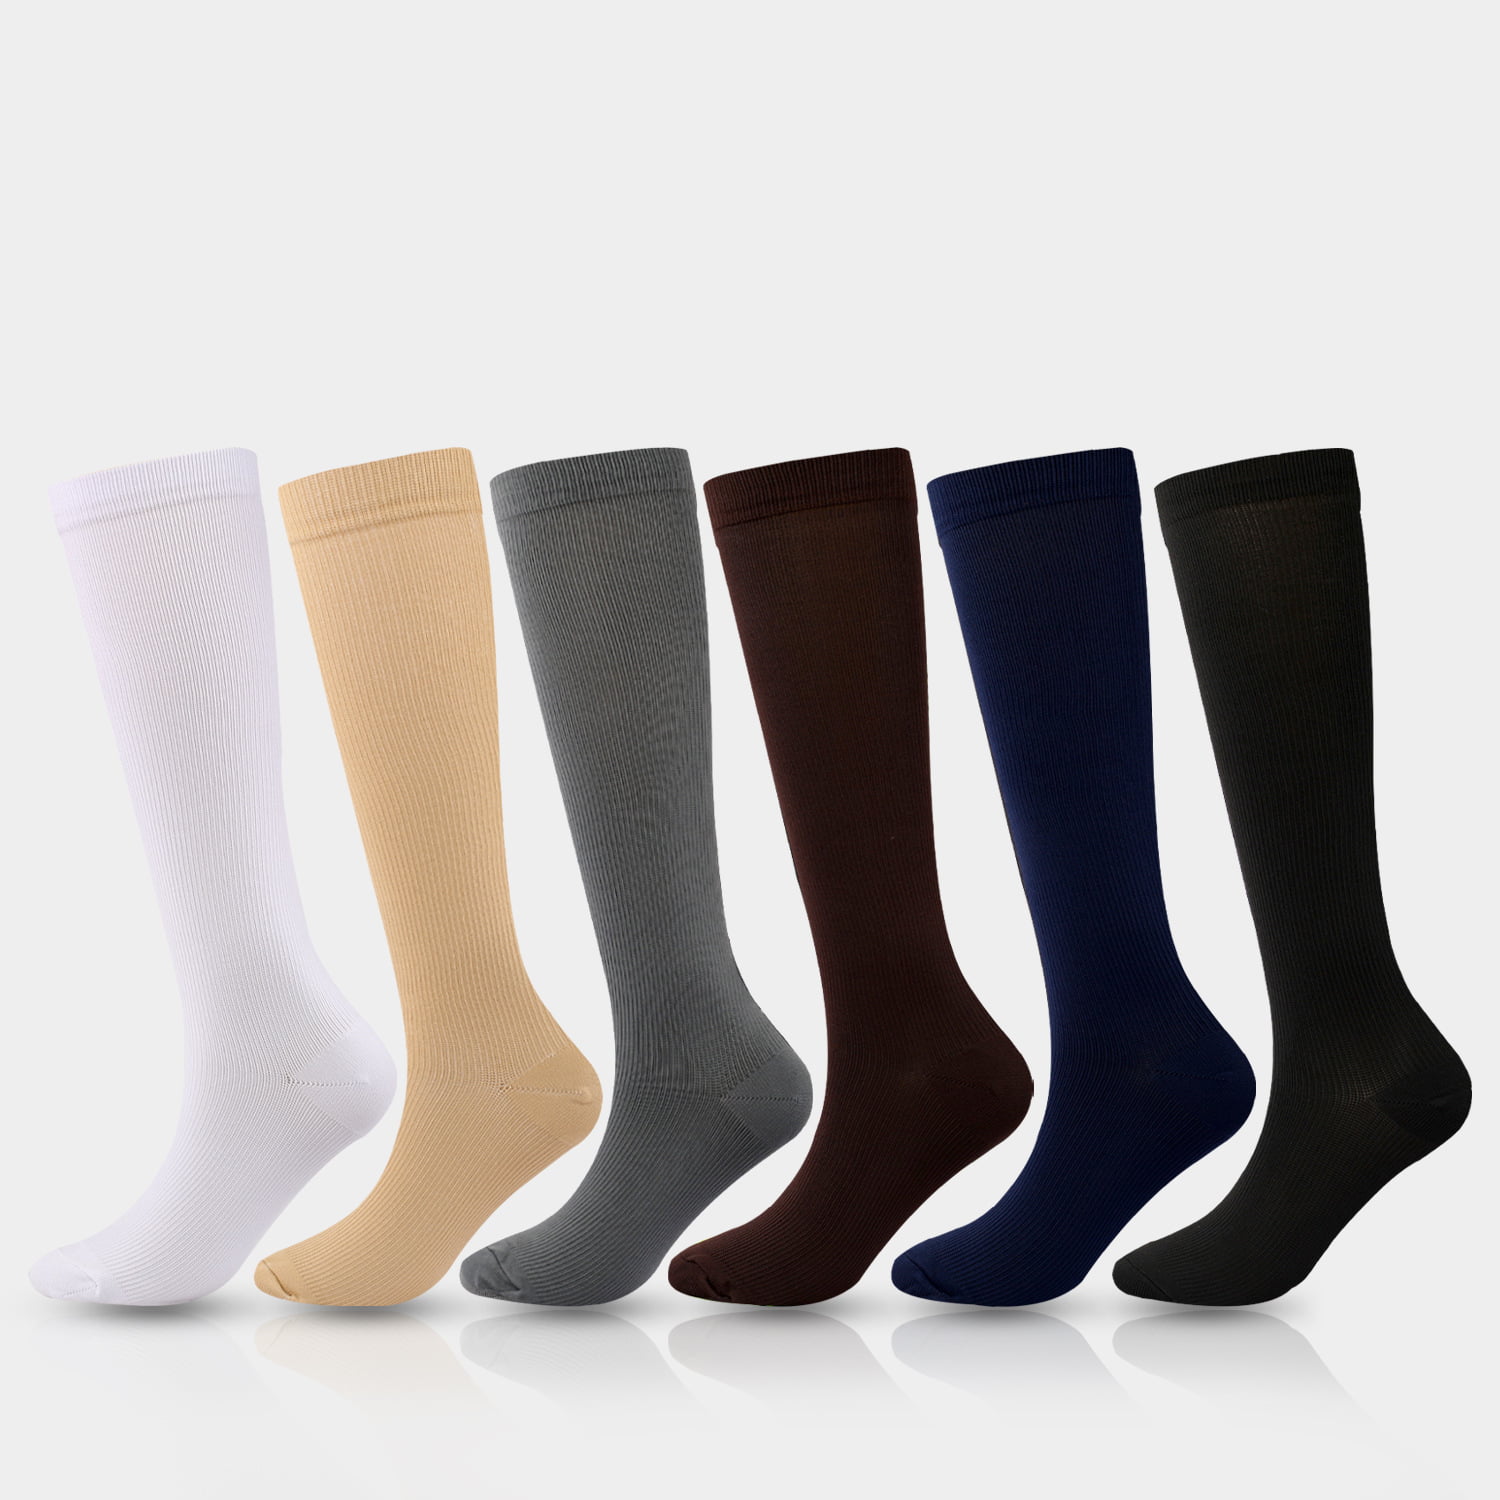 Ultra-light compression socks for outdoor sports, outdoor running and ...